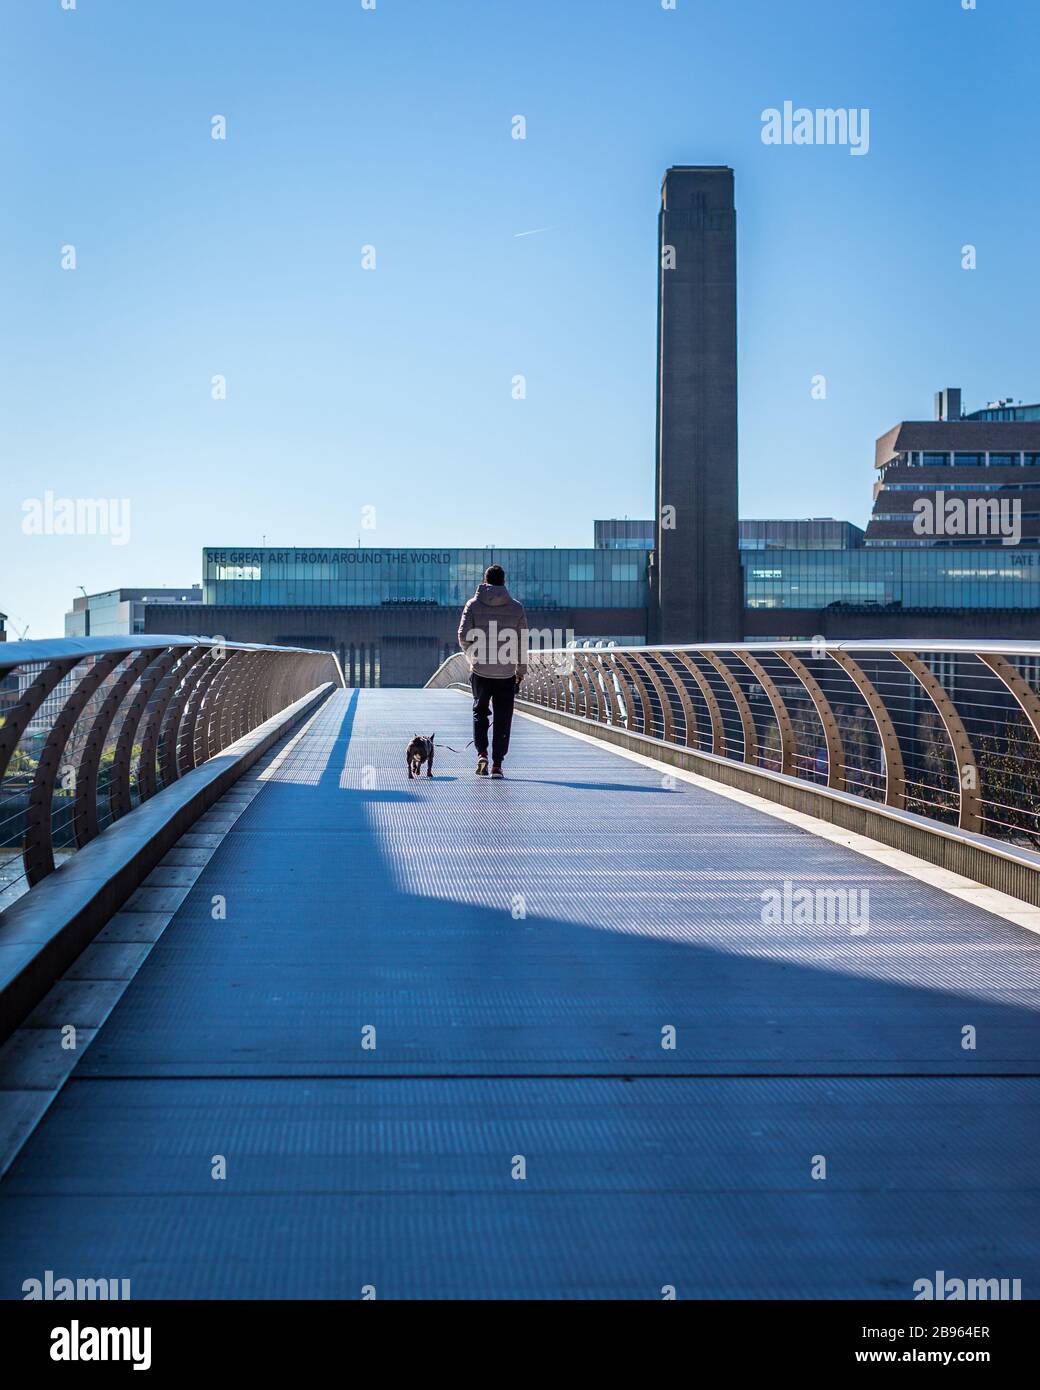 London, England - March 23, 2020: A lone walker & dog on millennium bridge in deserted London under lockdown during the Corona Virus Covid19 outbreak. Stock Photo